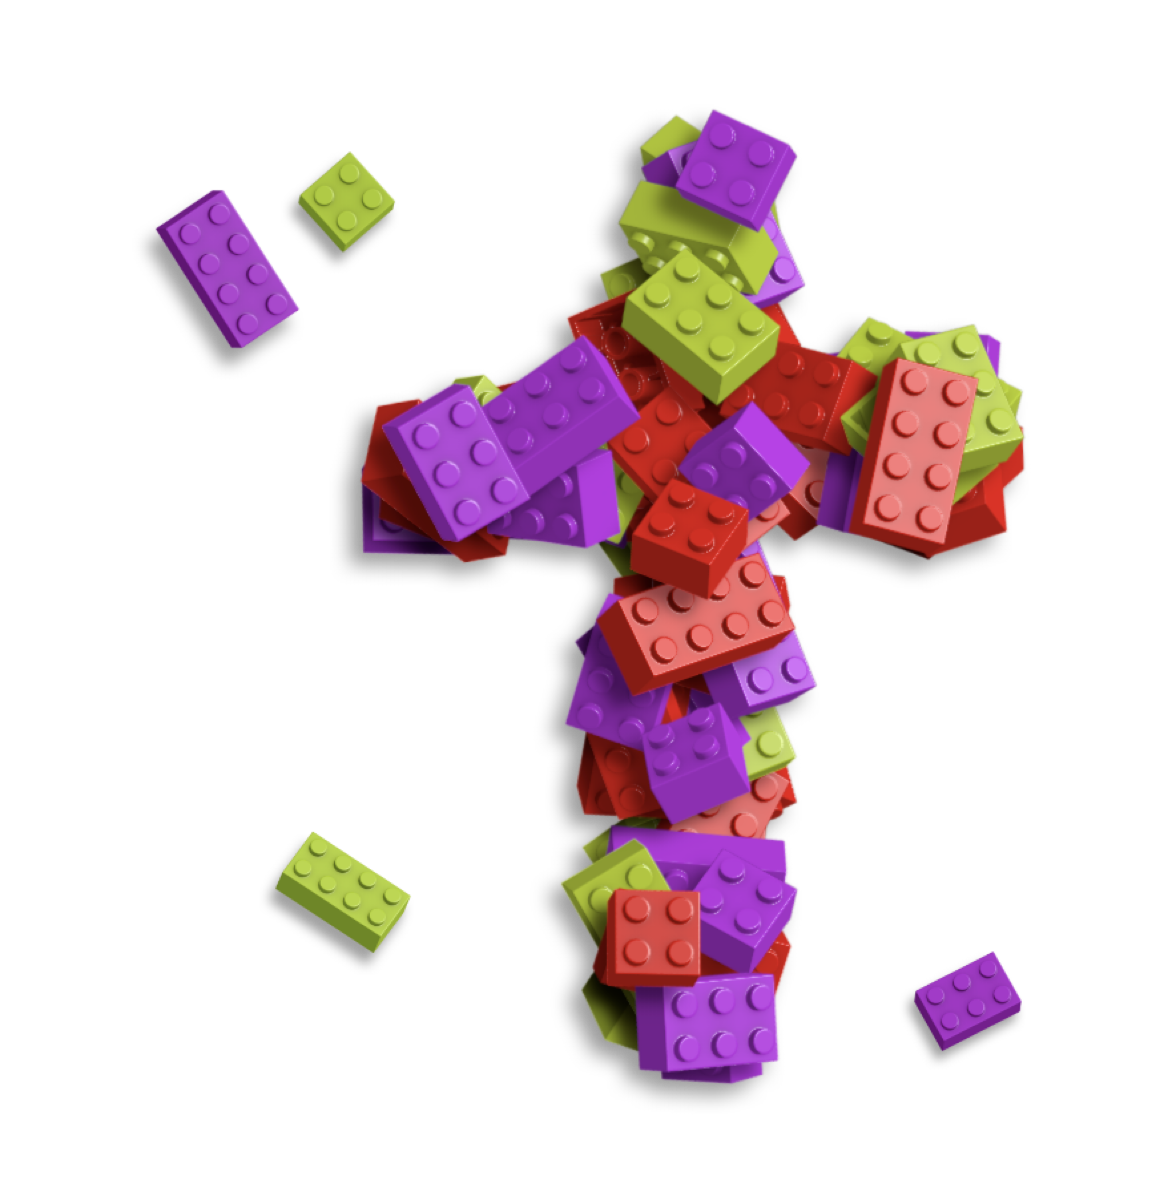 Shape of a cross using piles of different coloured lego bricks